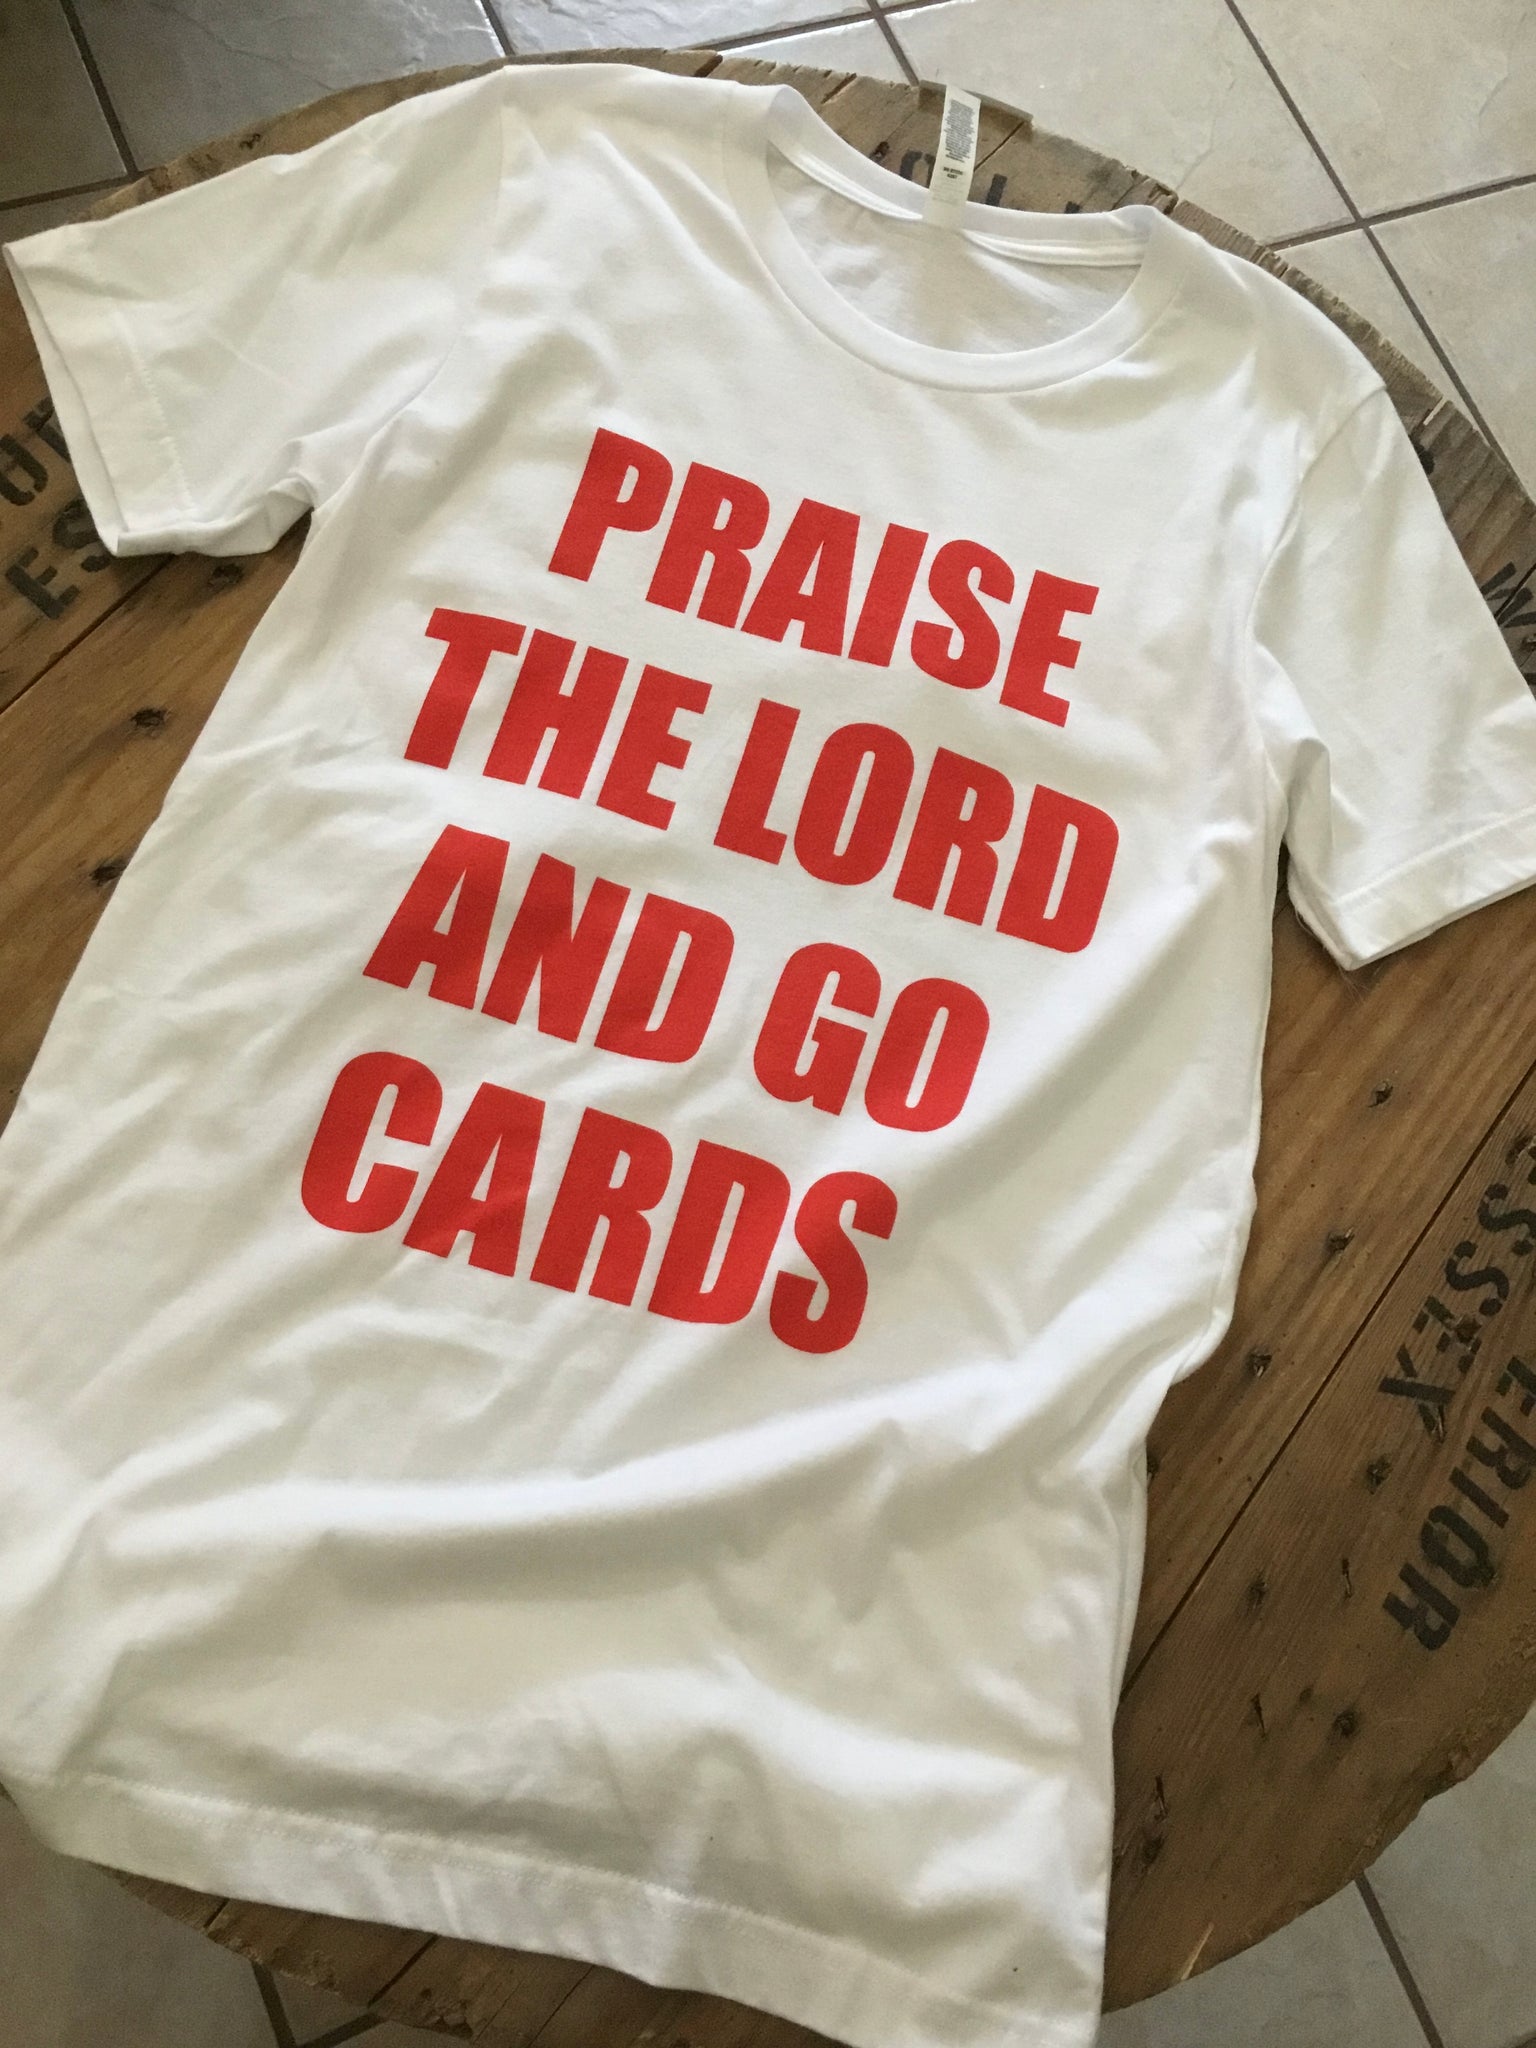 Praise The Lord and Go Cards -Tshirt -Louisville -Cardinals M